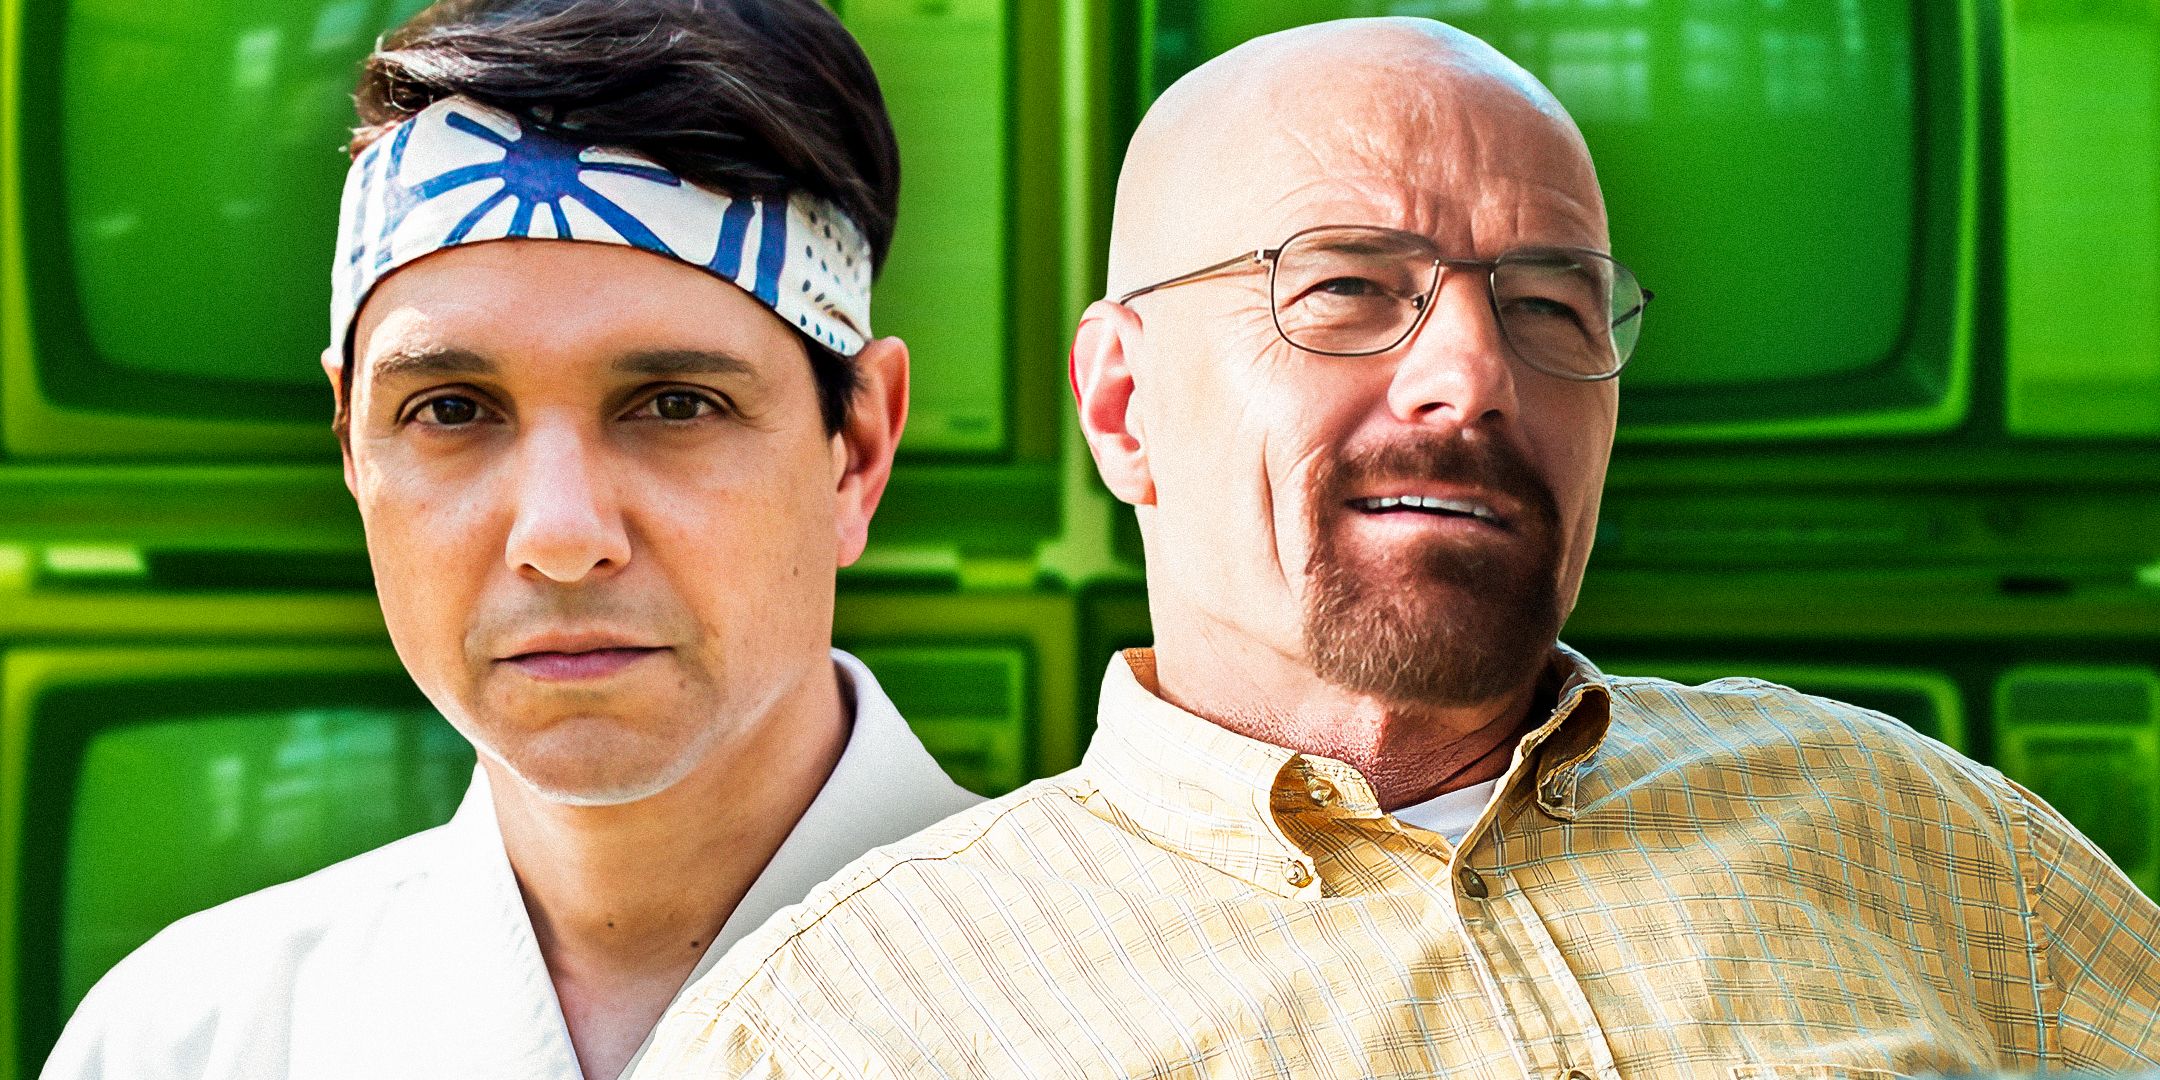 A custom image of Ralph Macchio and Bryan Cranston next to one another in front of TV screens.